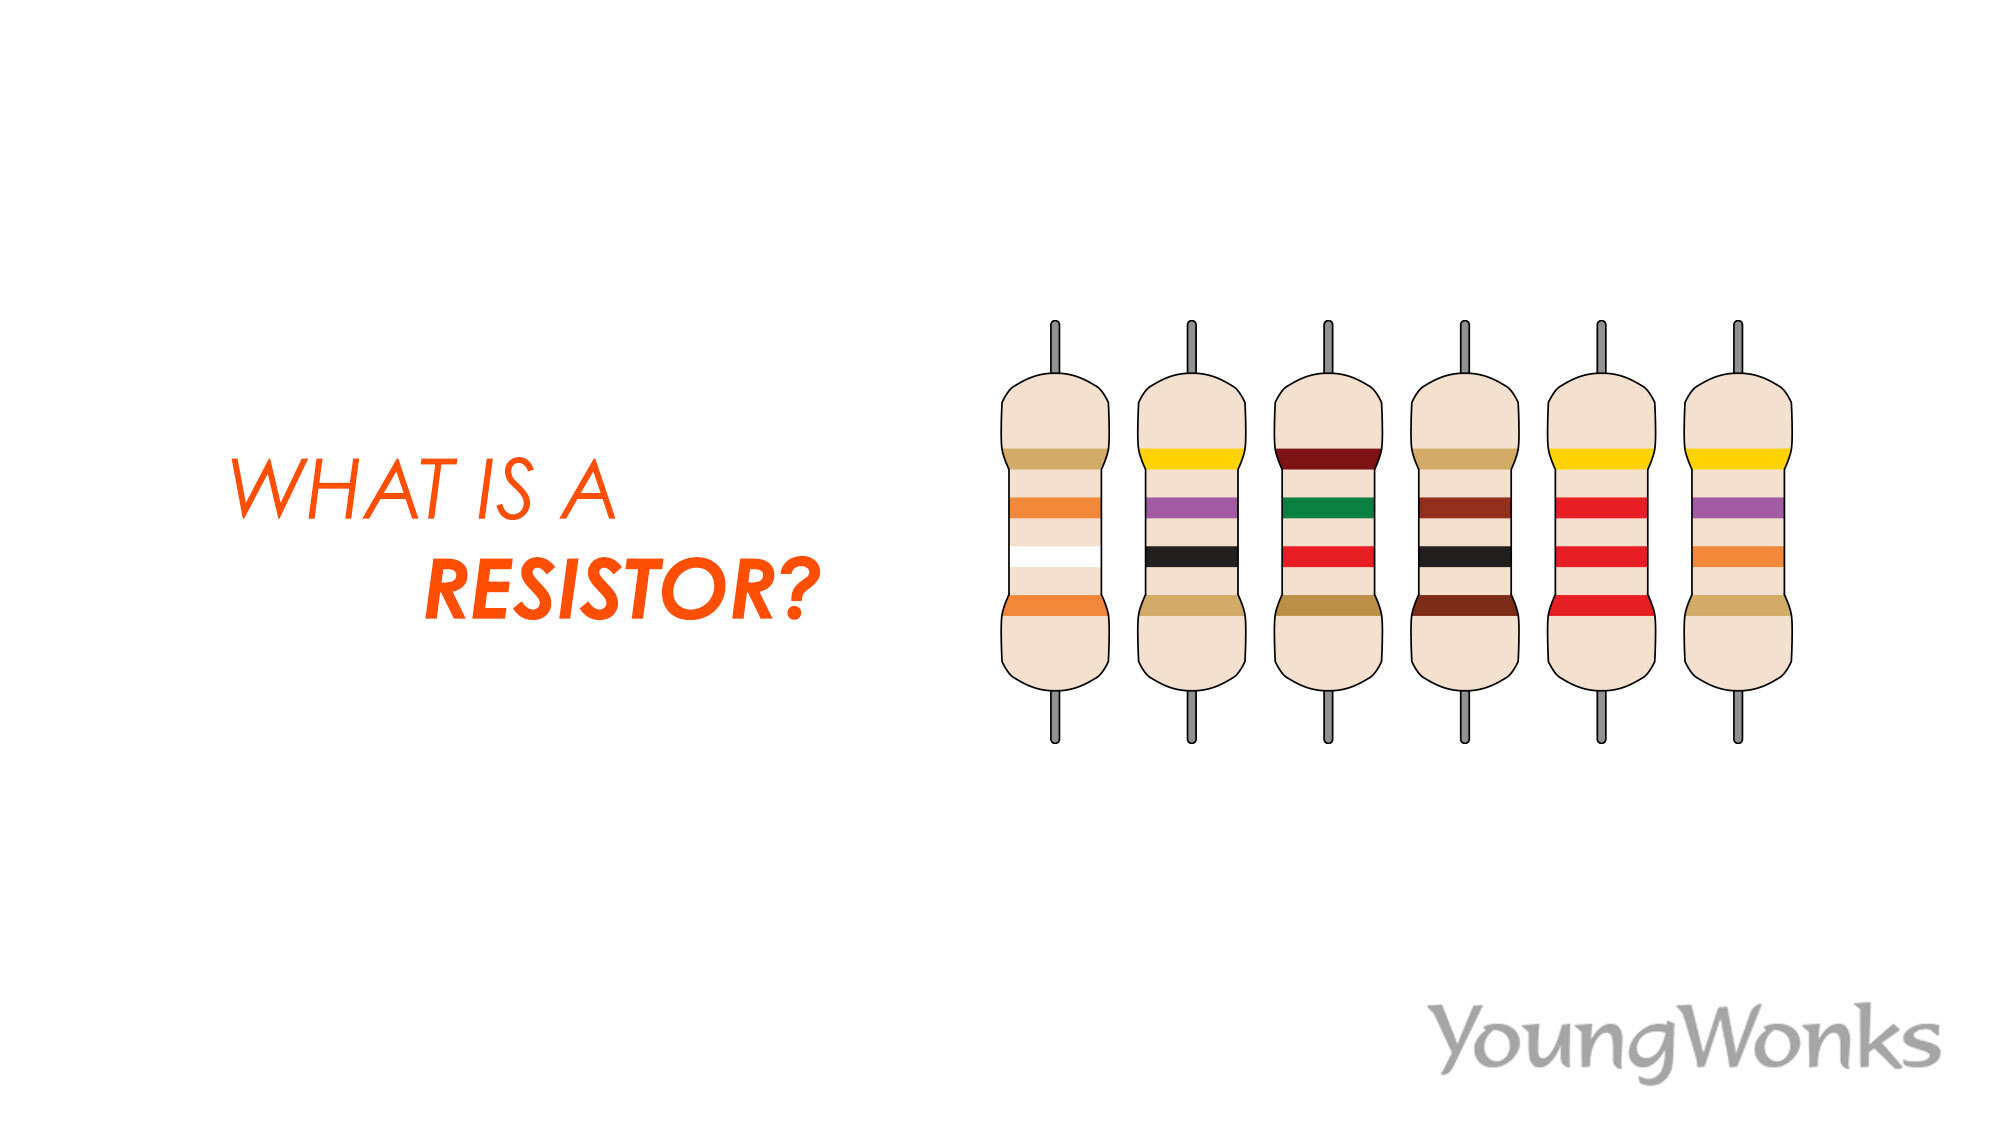 https://dnycf48t040dh.cloudfront.net/What-is-a-Resistor.jpeg